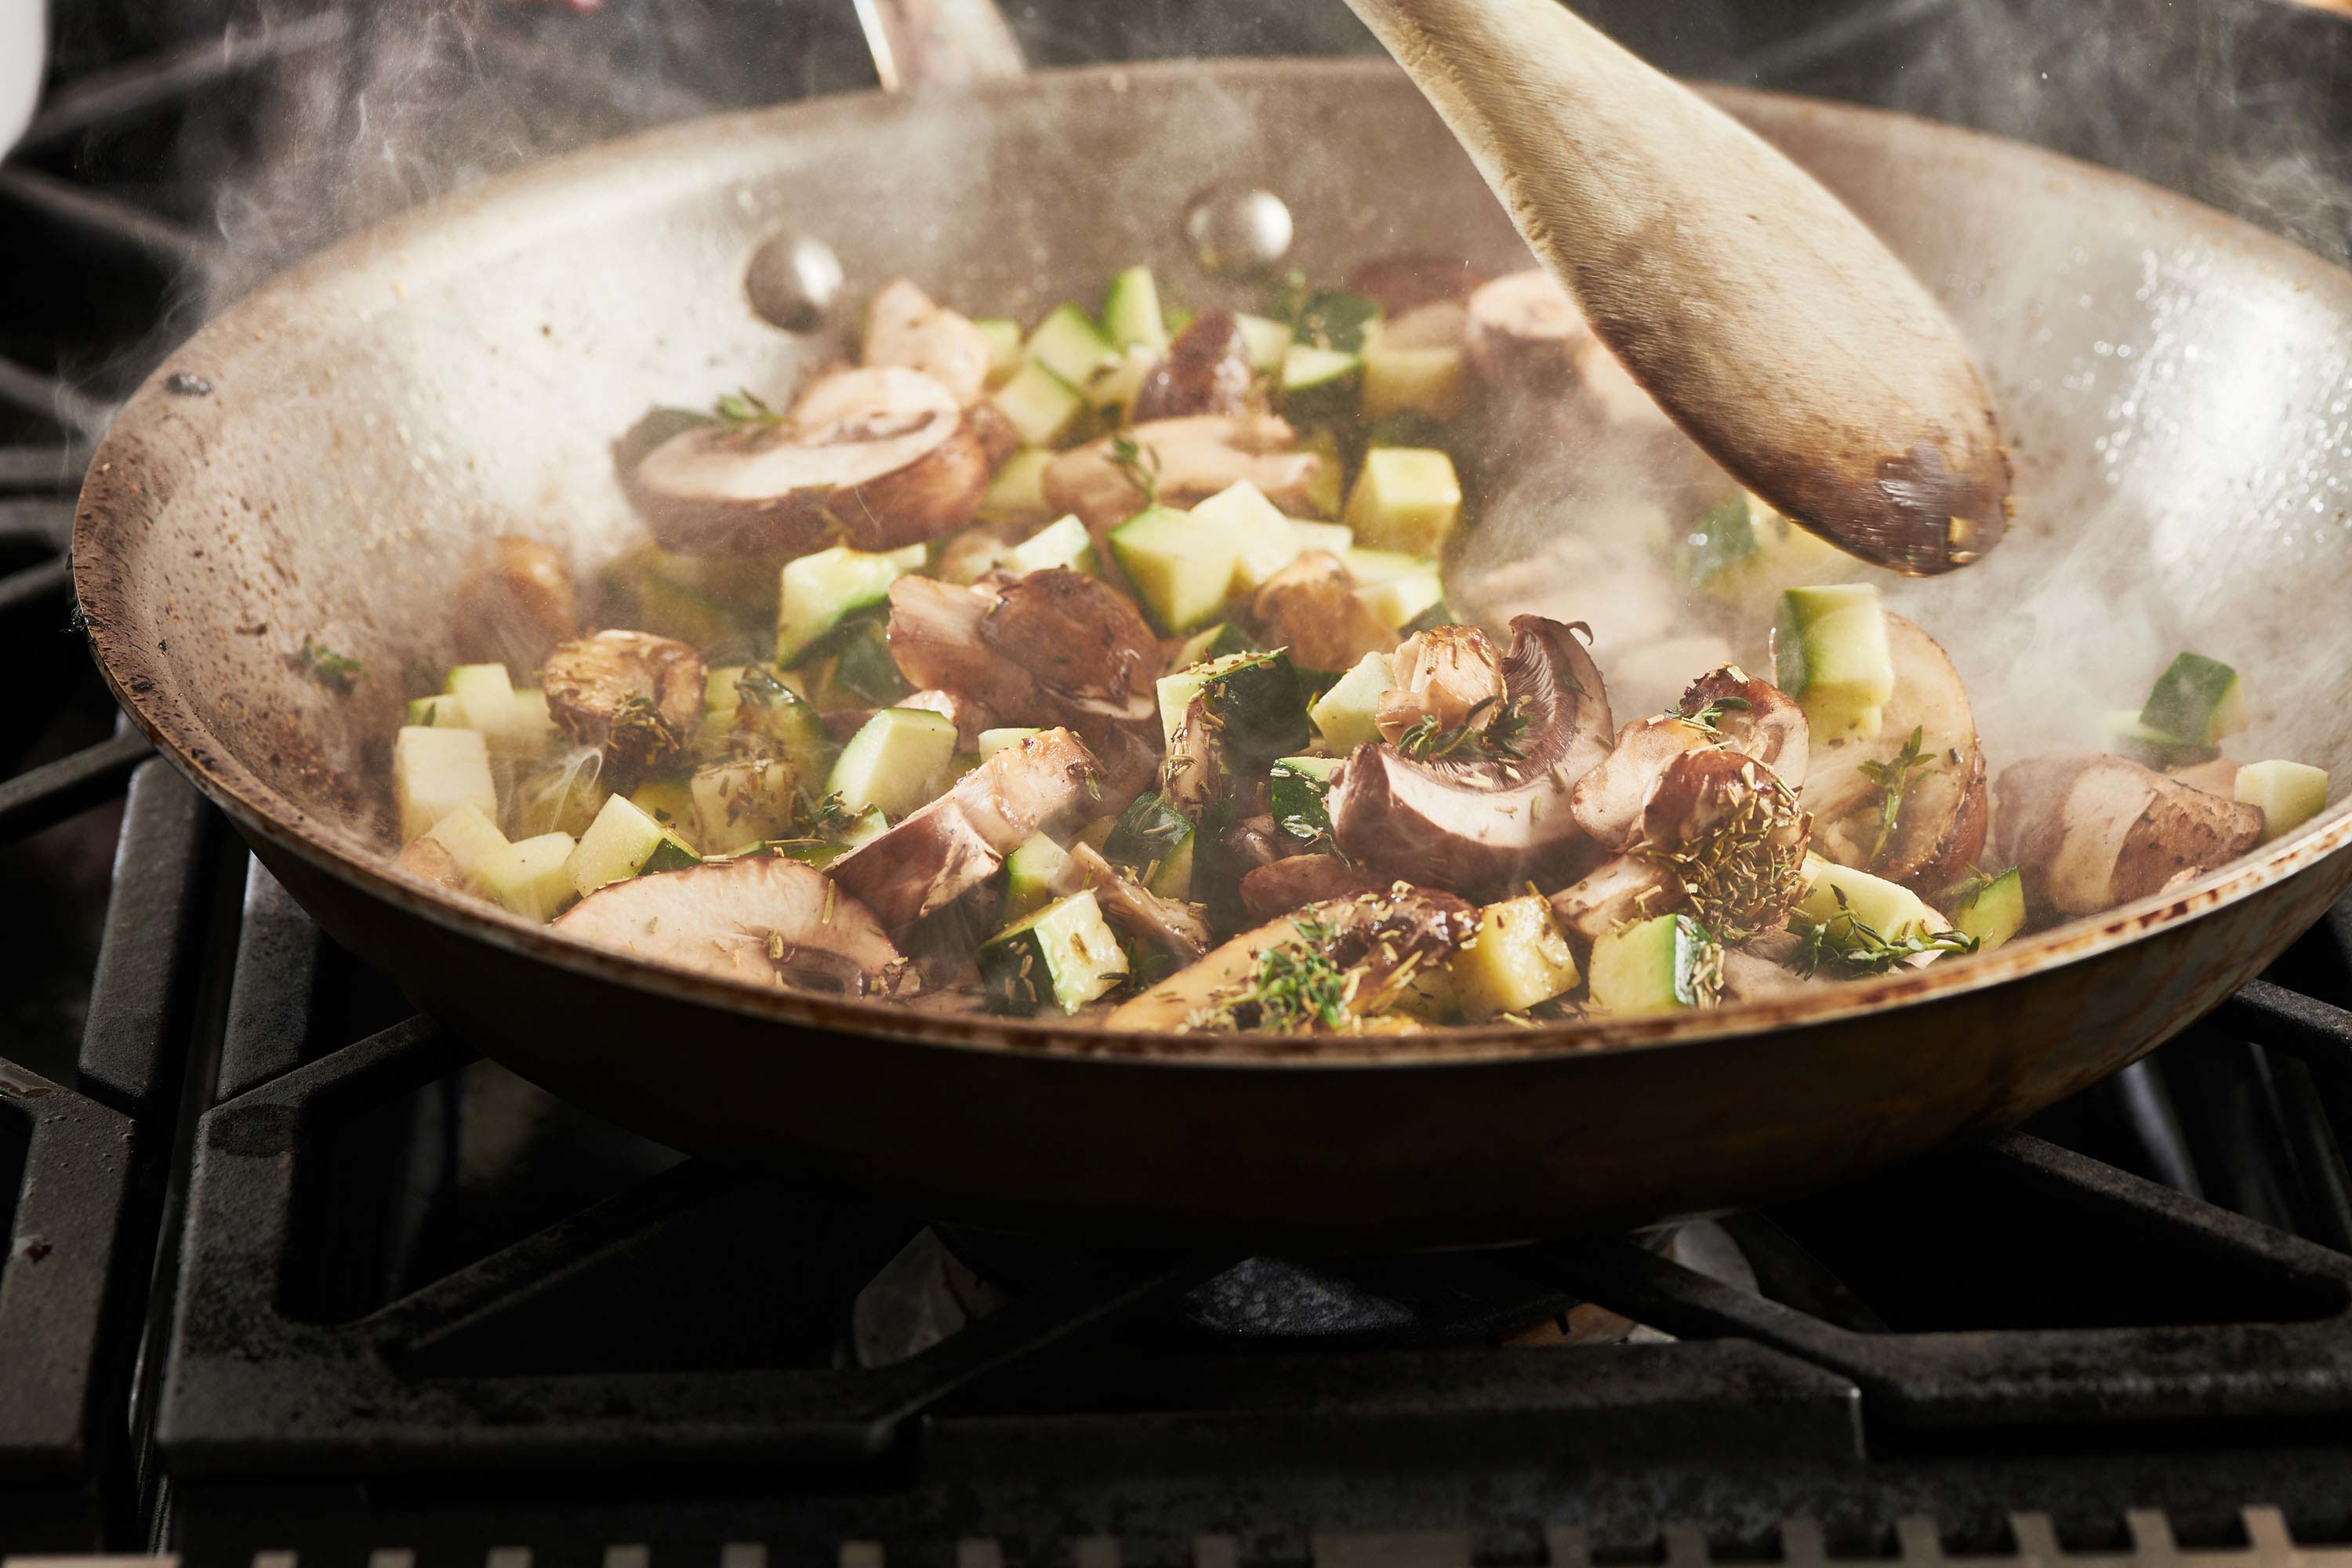 Zucchini and mushrooms sauteing in skillet.